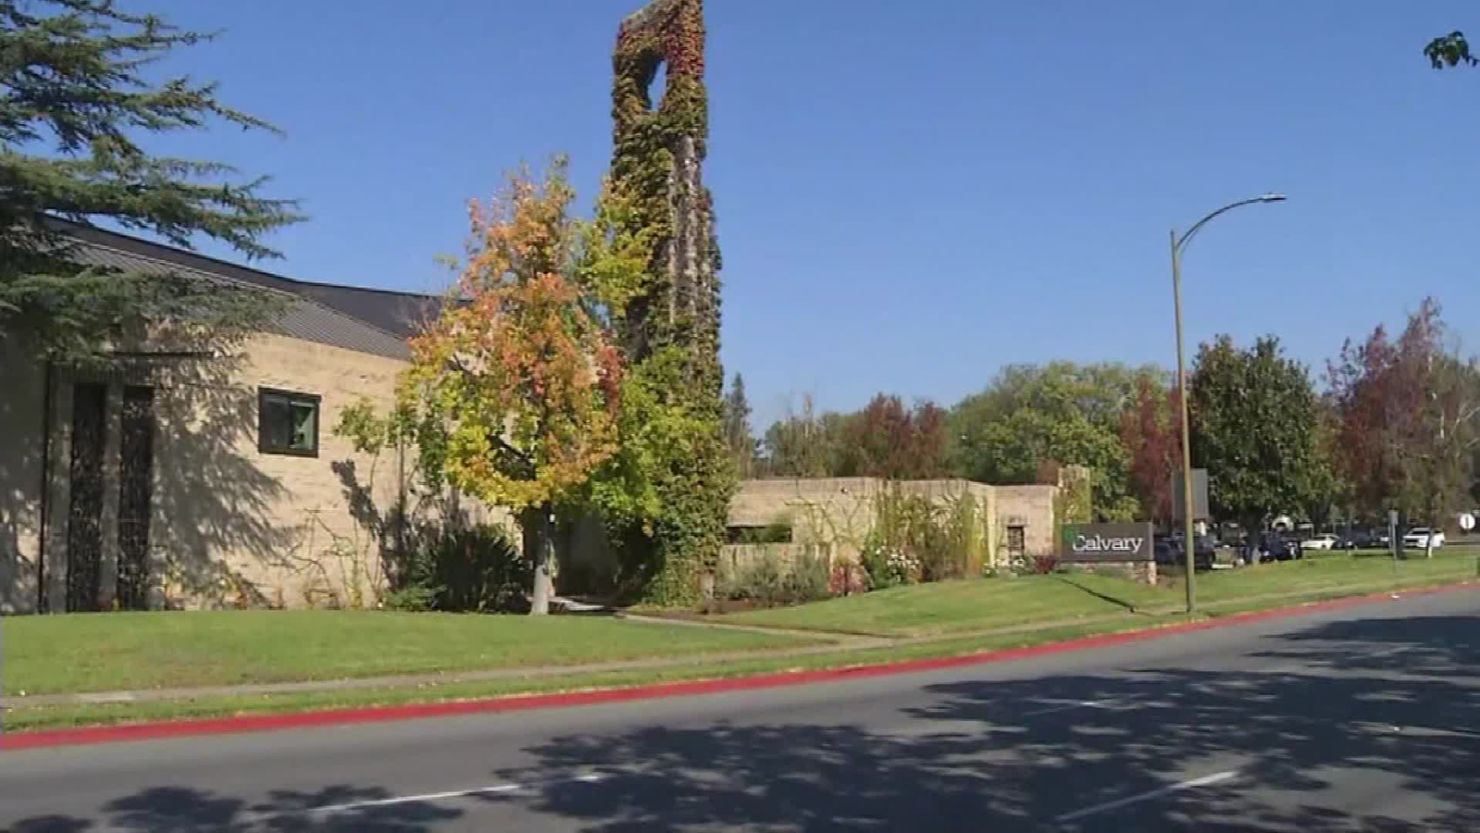 The Santa Clara County Superior Court has issued a temporary restraining order banning Calvary Chapel in San Jose from holding large gatherings.